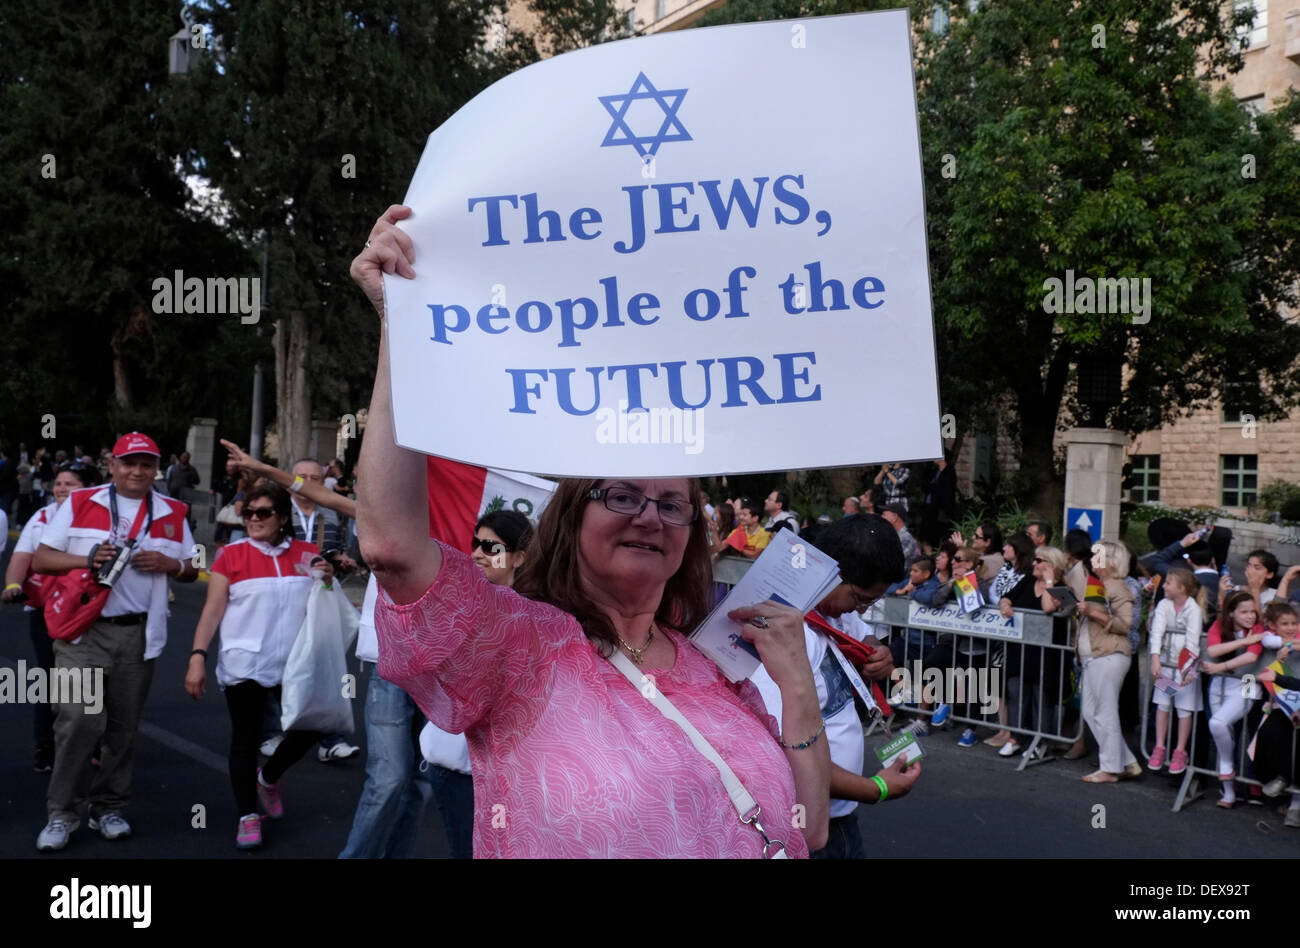 An Evangelical Christian holds a paperboard sign which reads 'The Jews People of the Future' during the annual Jerusalem March during Sukkot feast of the Tabernacles to show their love for the Jewish people and the state of Israel. The parade is hosted by the International Christian Embassy Jerusalem (ICEJ) and draws thousands of Christians from around the world in support of Israel. Stock Photo